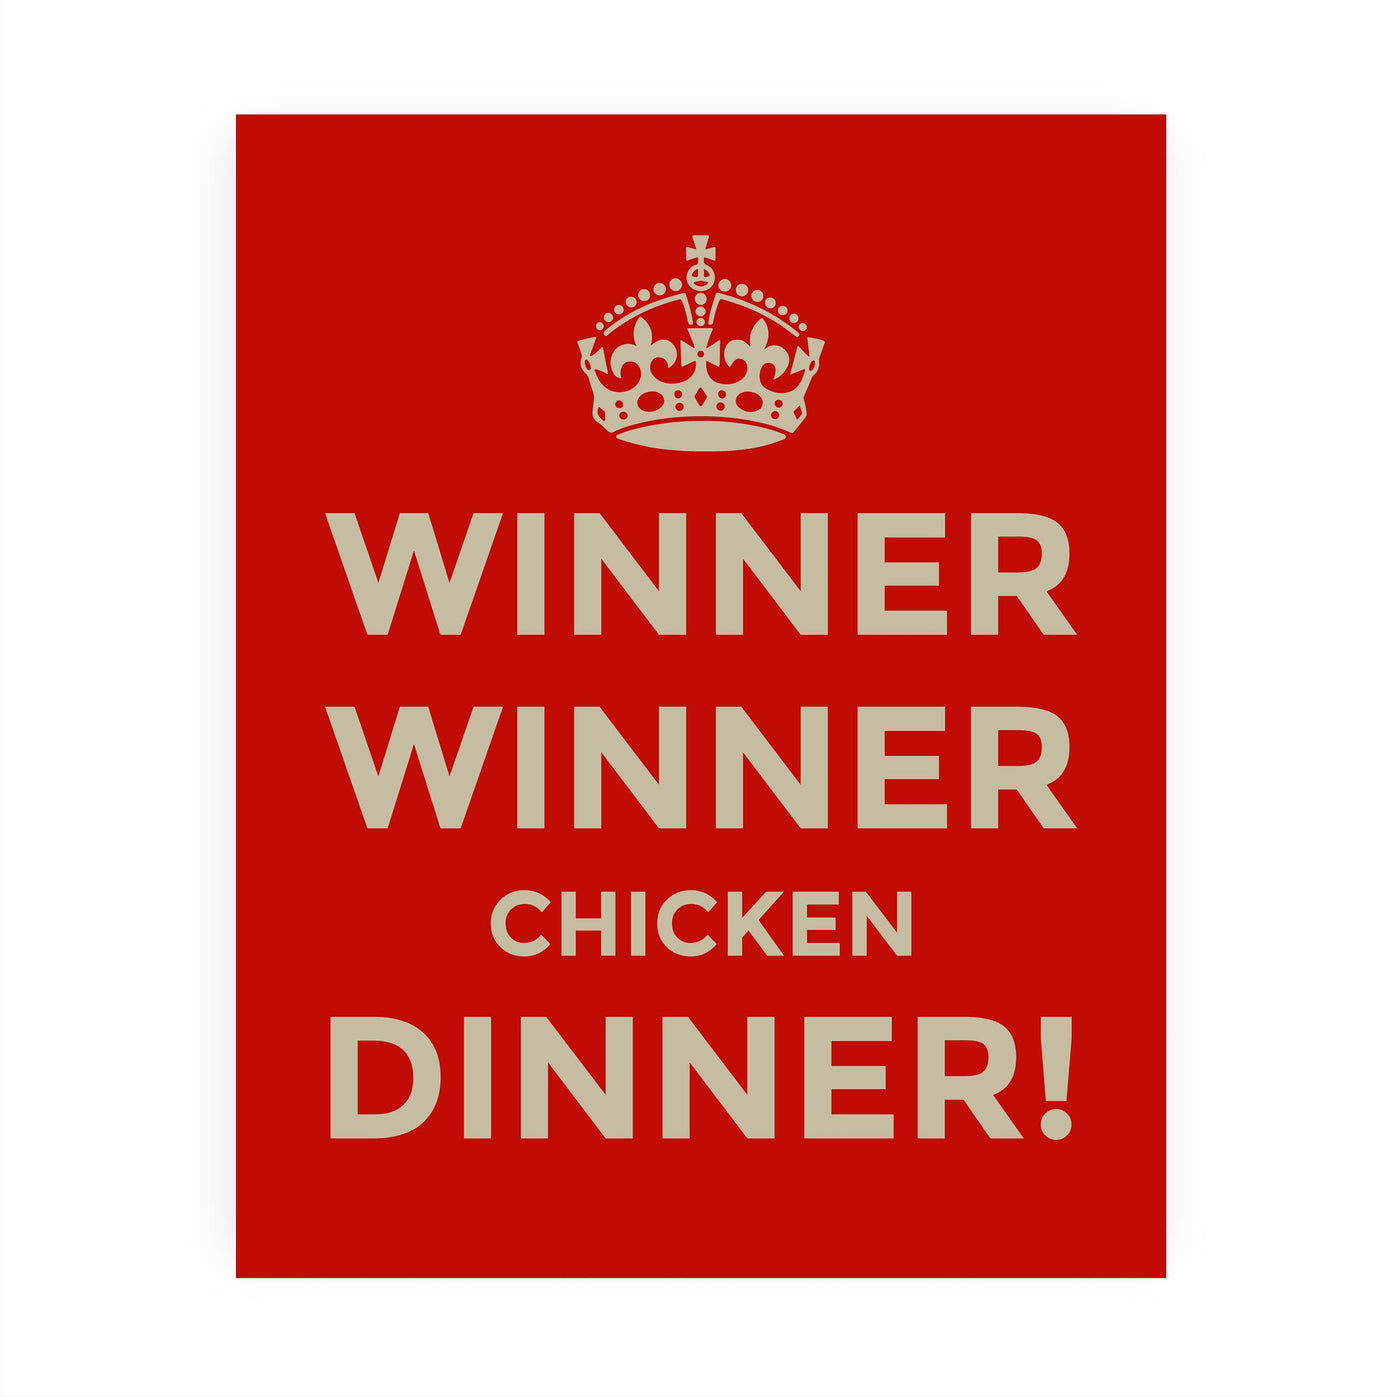 Winner Winner Chicken Dinner Funny Kitchen Wall Sign -8 x 10" Typographic Farmhouse Wall Art Print -Ready to Frame. Perfect Home, Kitchen, & Dining Decor. Fun Sign for Family, Friends & Guests!